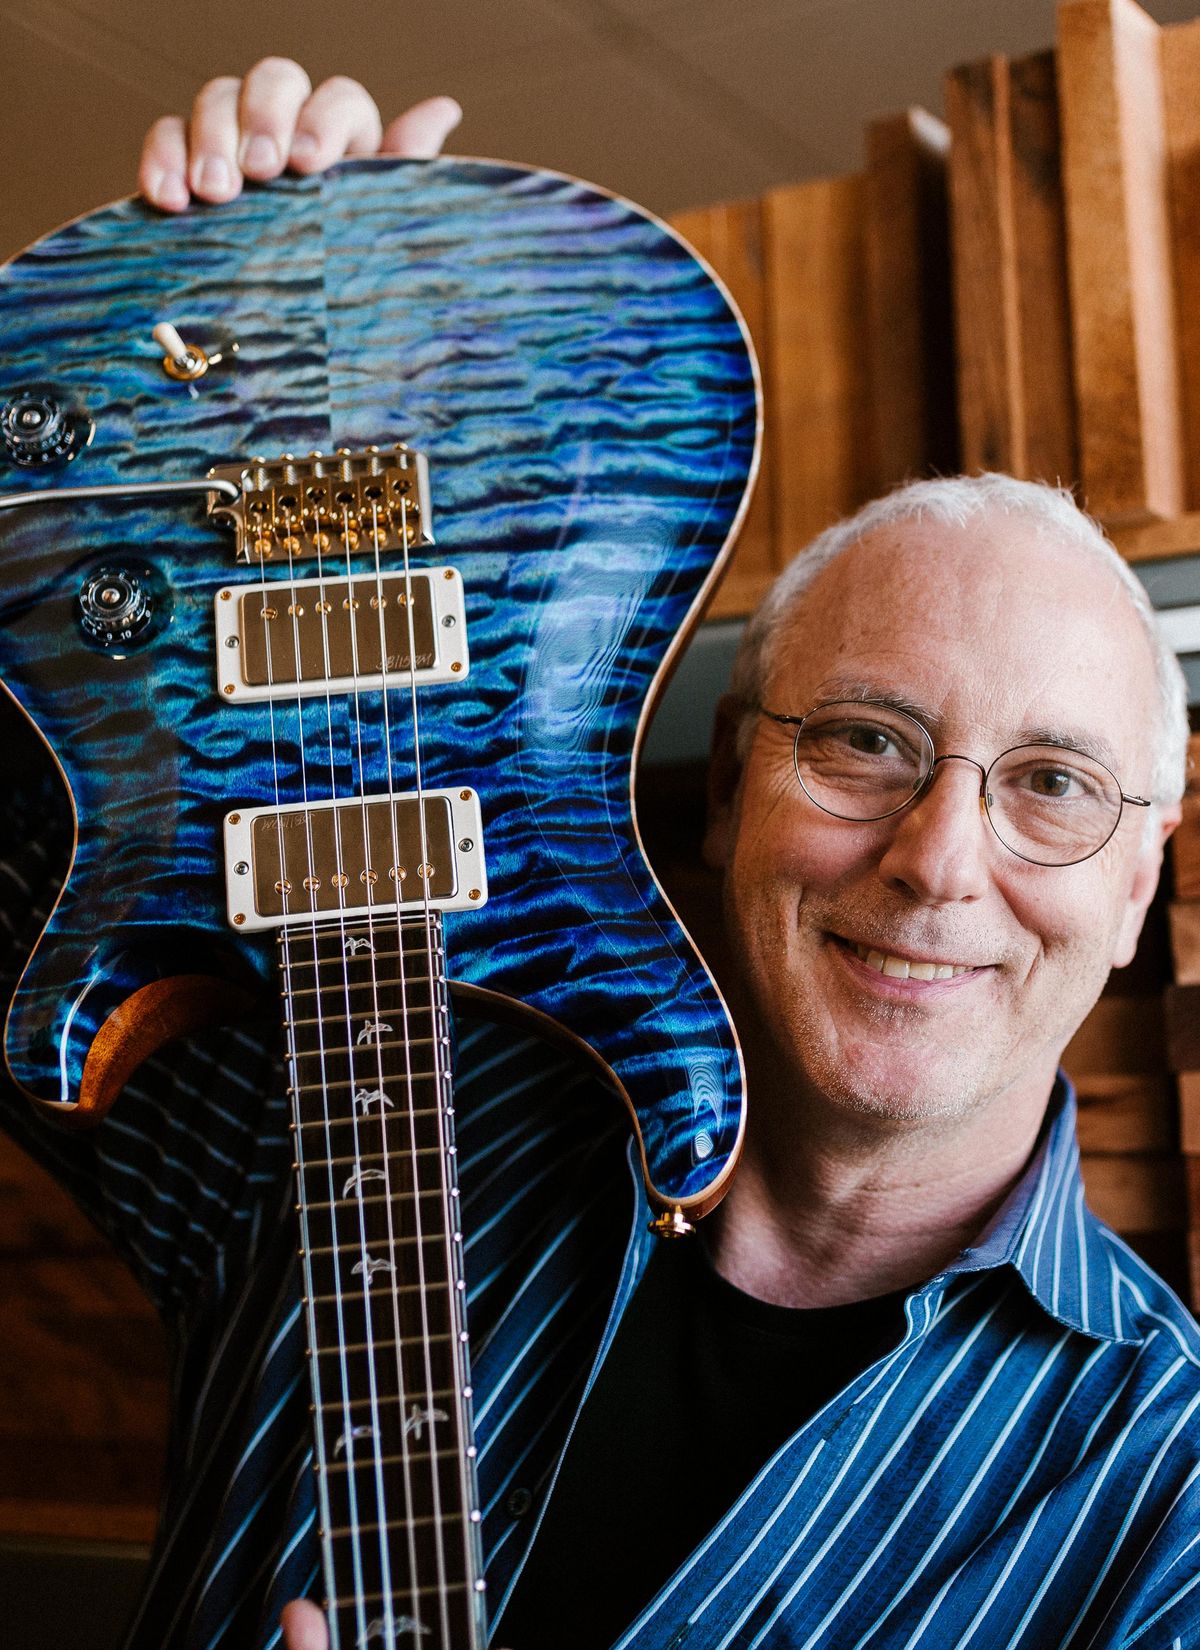 Paul Reed Smith: The Luthier Behind the Initials